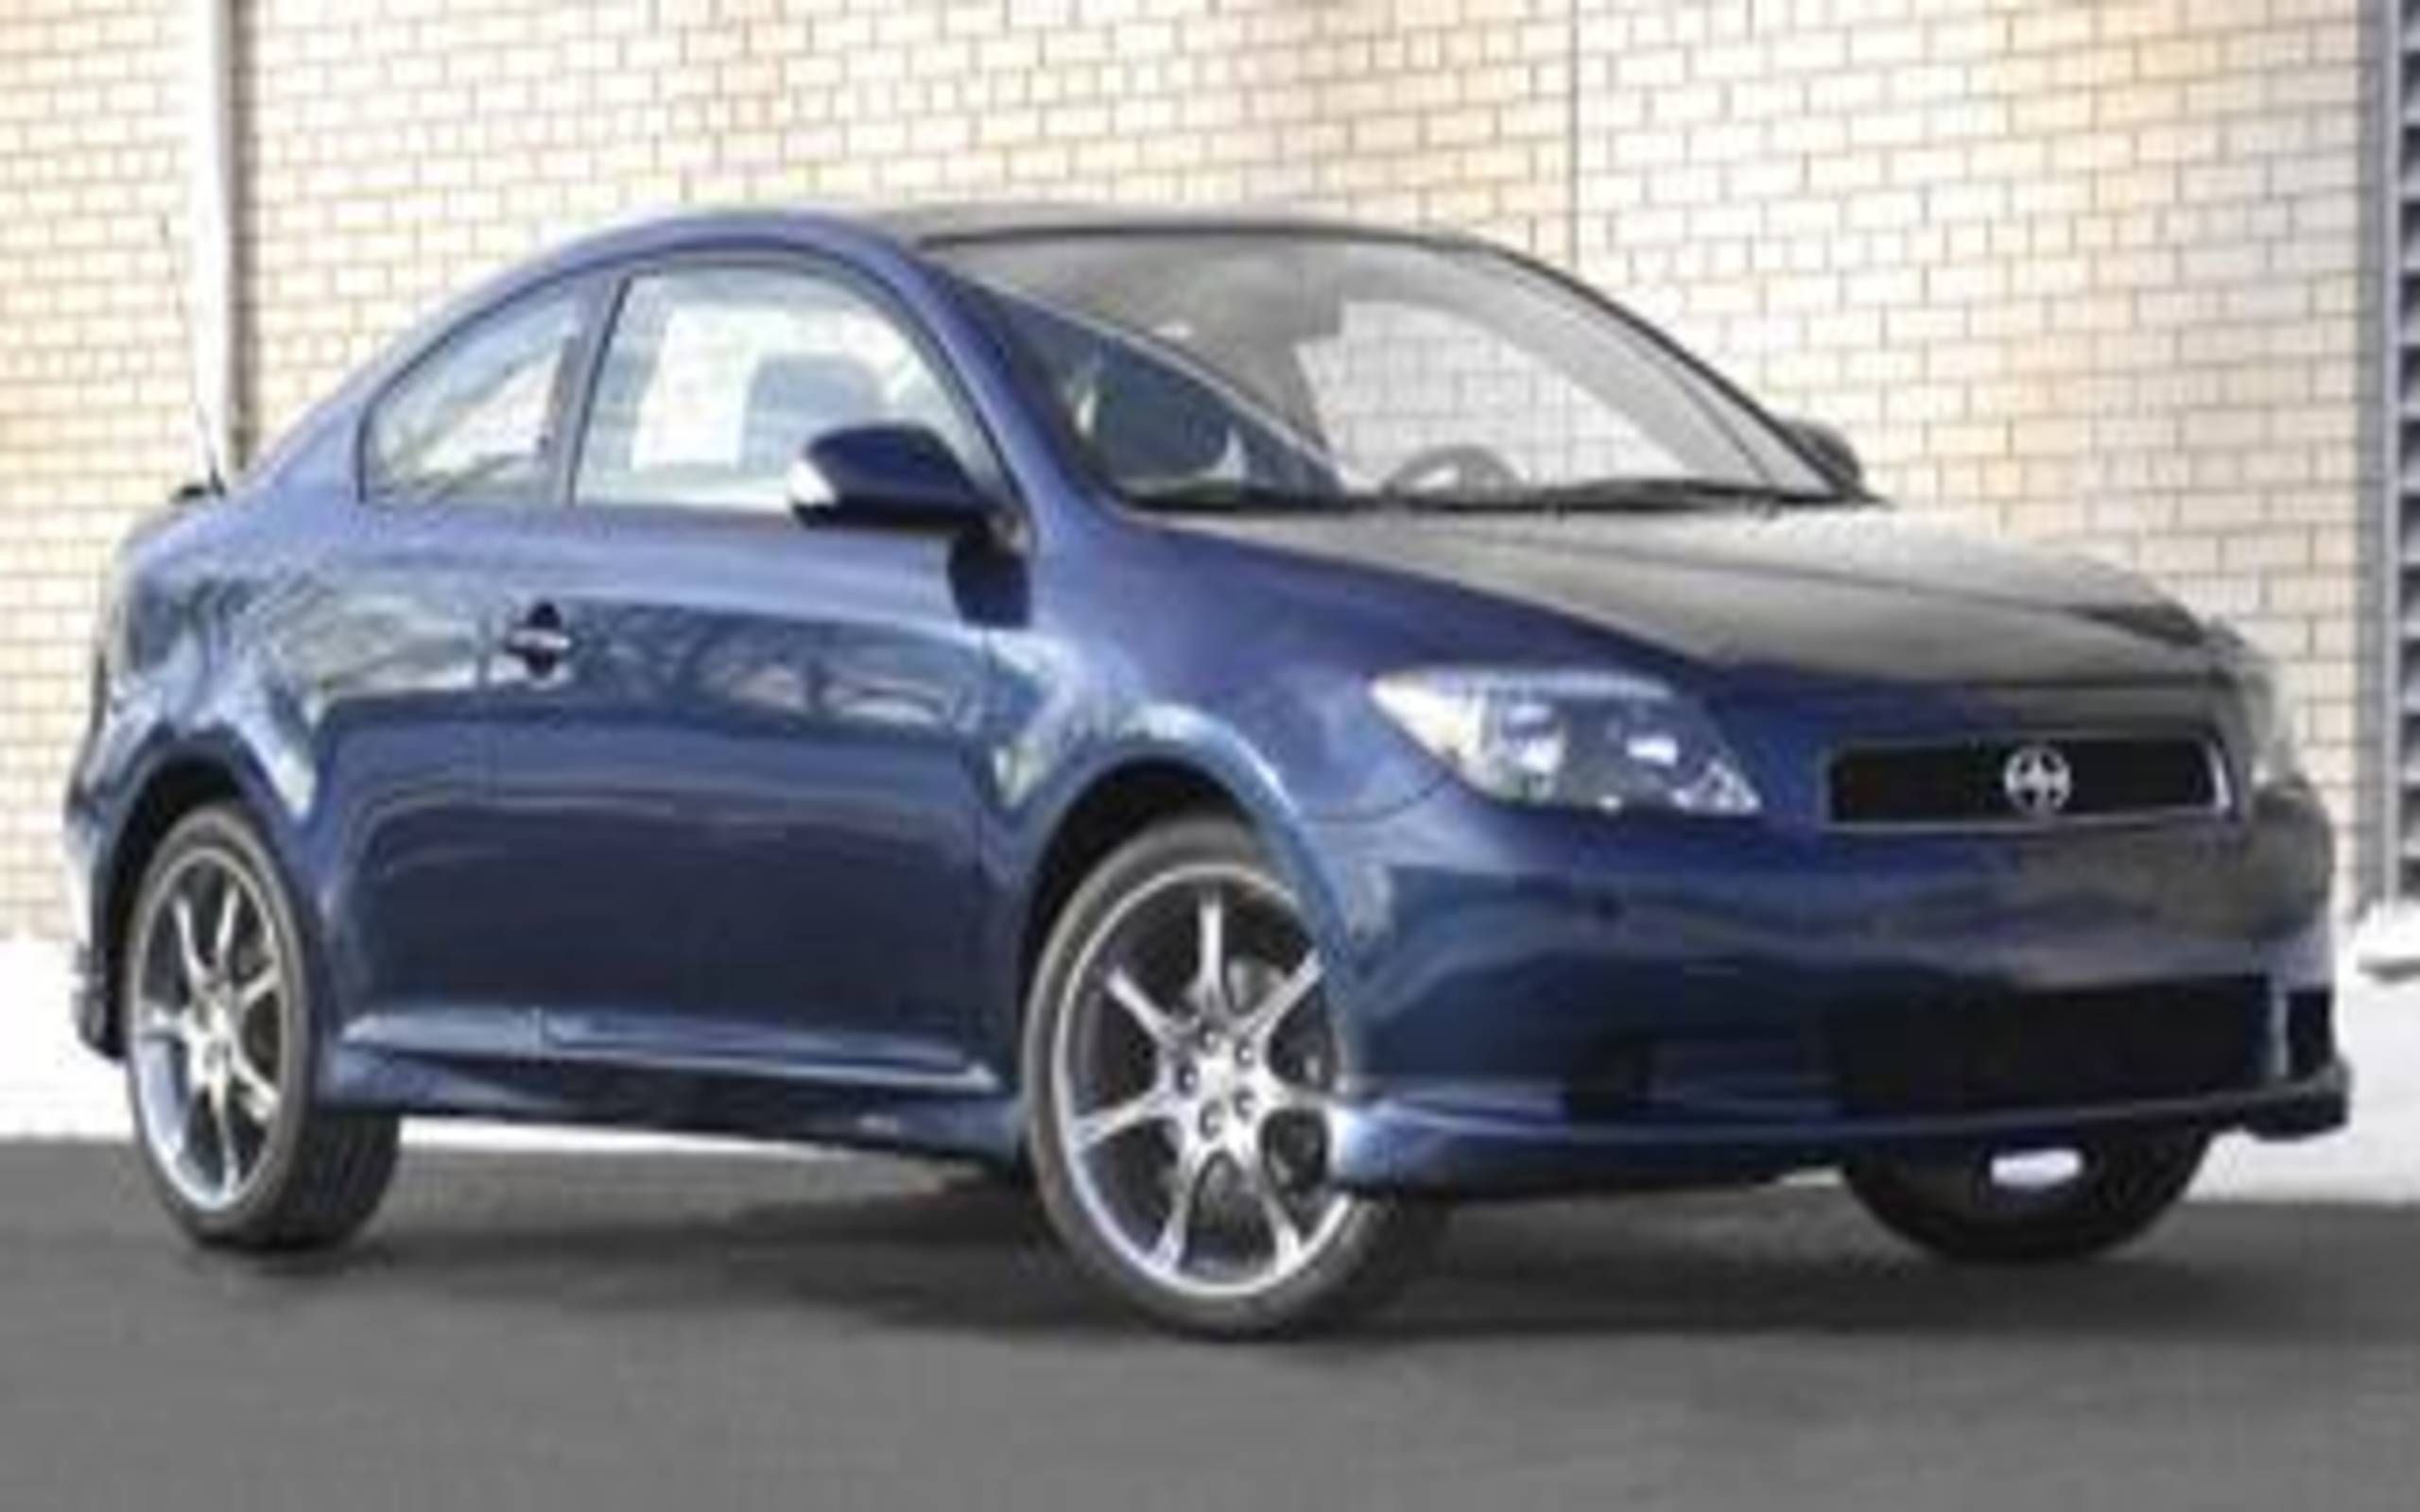 2005 Scion Tc Introduction Scionism Thus Begins A Year In The Tc